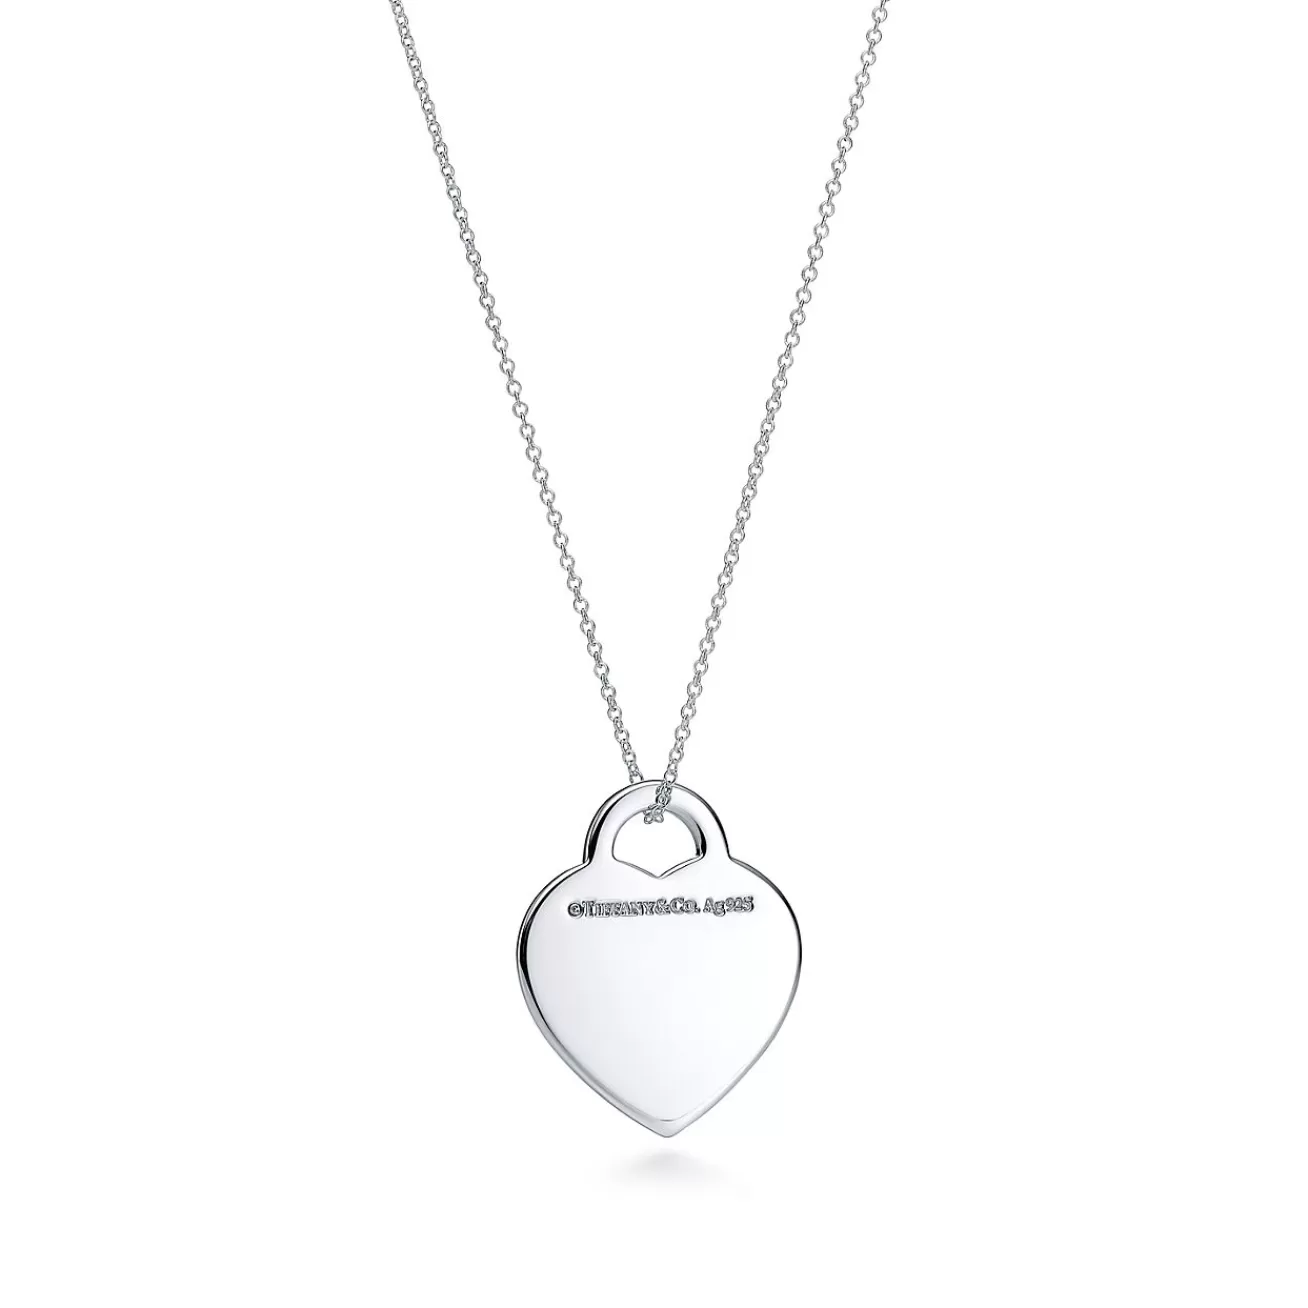 Tiffany & Co. Return to Tiffany® Heart Tag Pendant in Silver, Medium | ^ Necklaces & Pendants | Gifts for Her